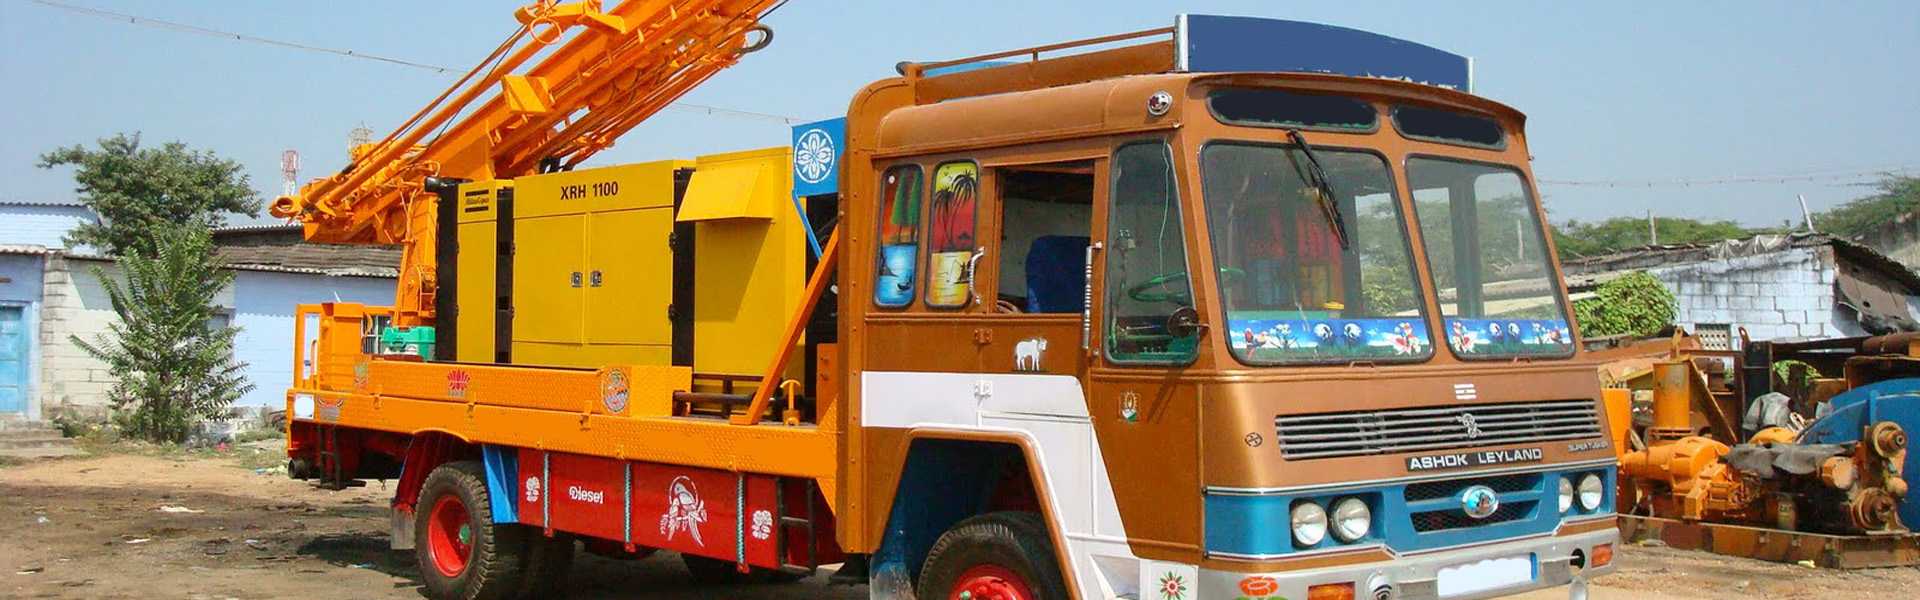 An orange truck carries a borewell machine for borewell drilling, cleaning, and flushing services